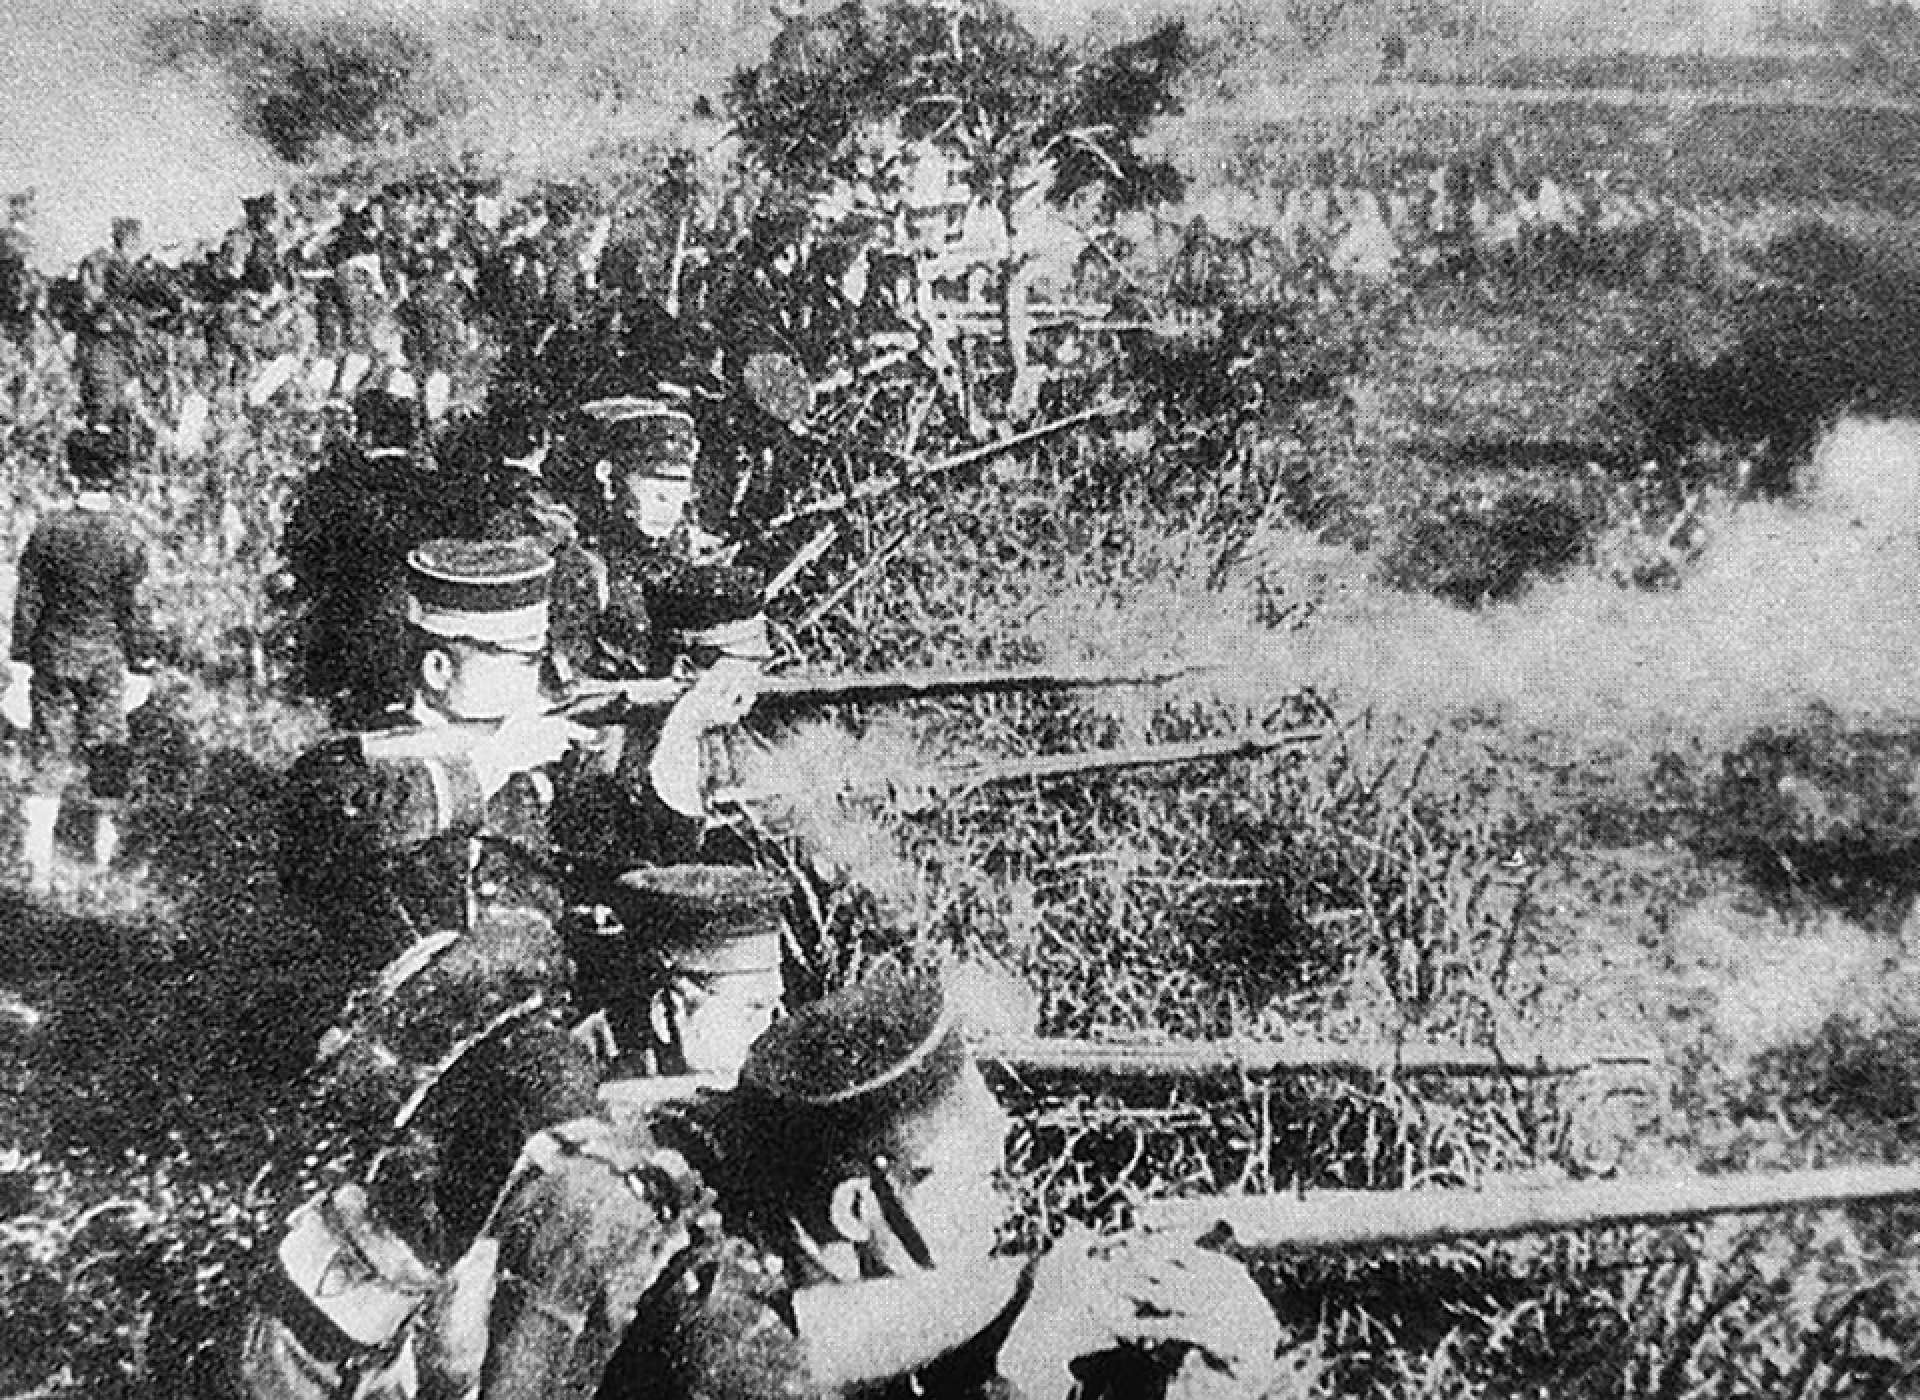 Soldiers of the Imperial Japanese Army firing their Murata Type 22 rifles